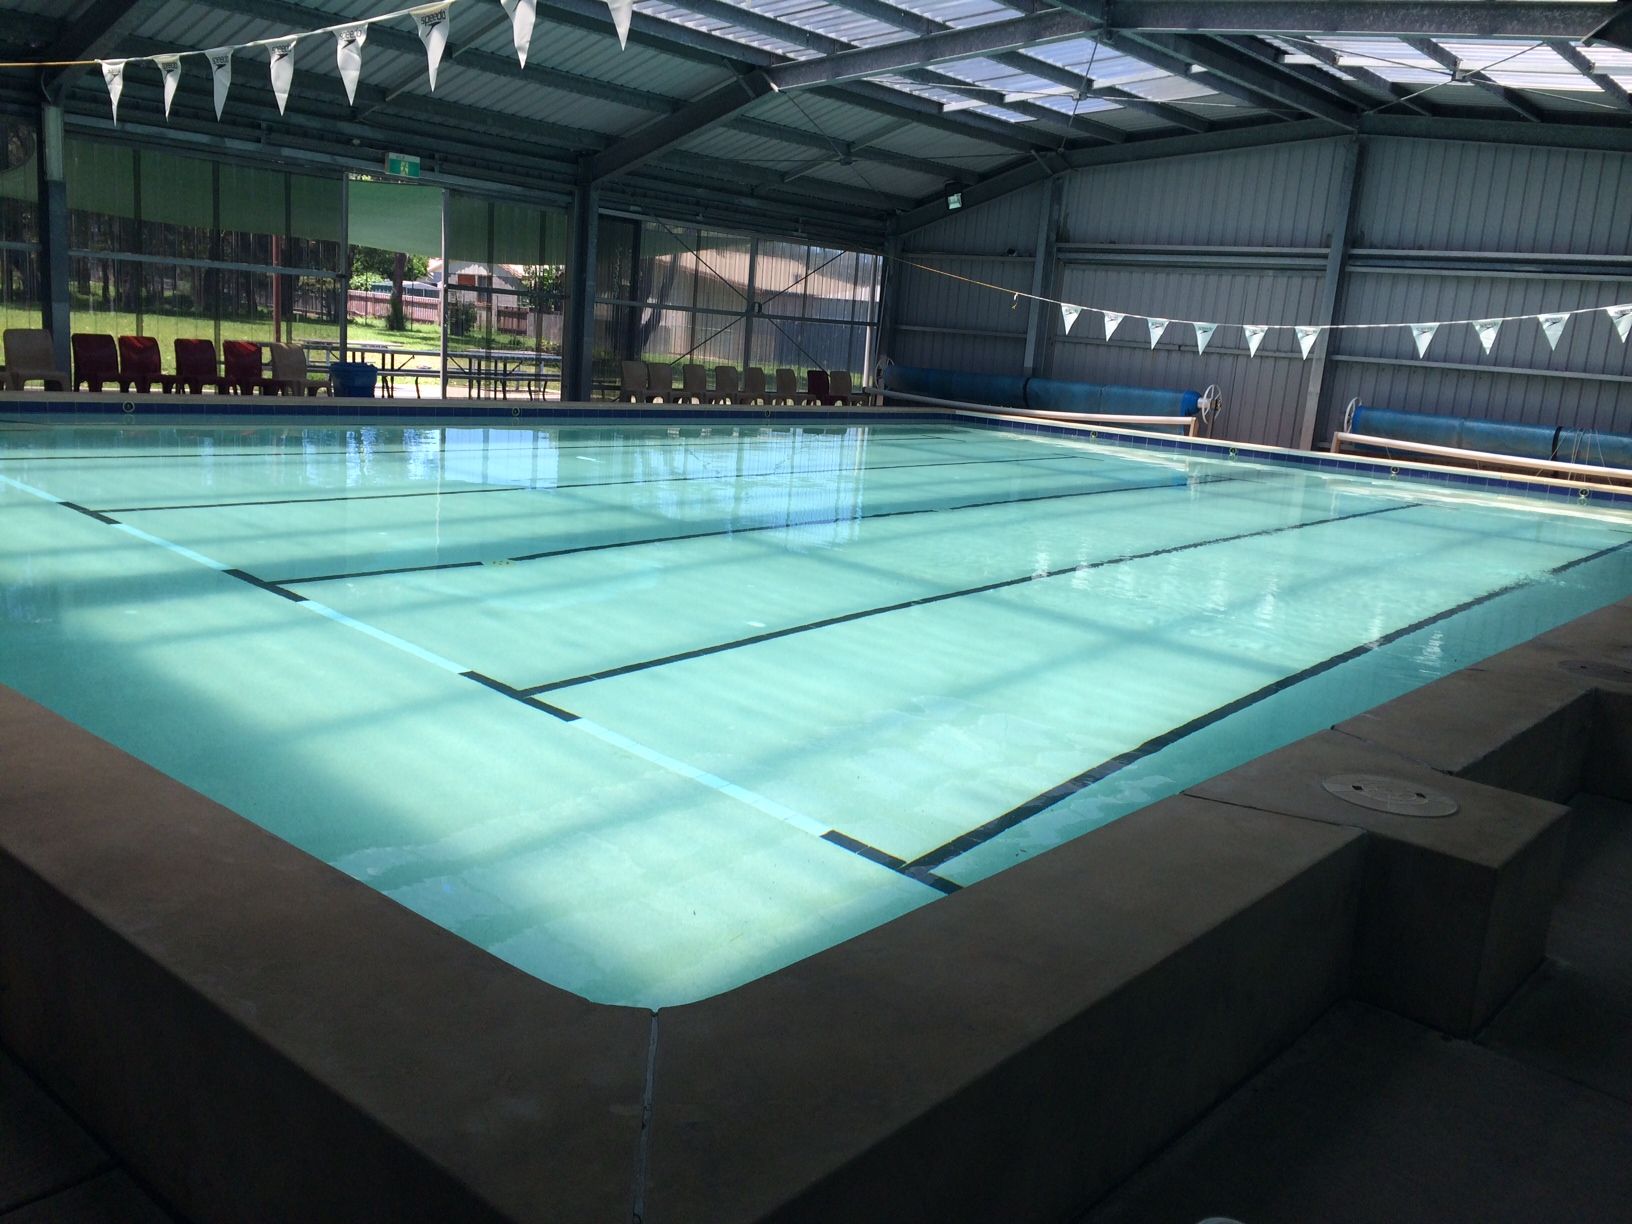 Pool Hire — Hydrotherapy in Croudance Bay, NSW